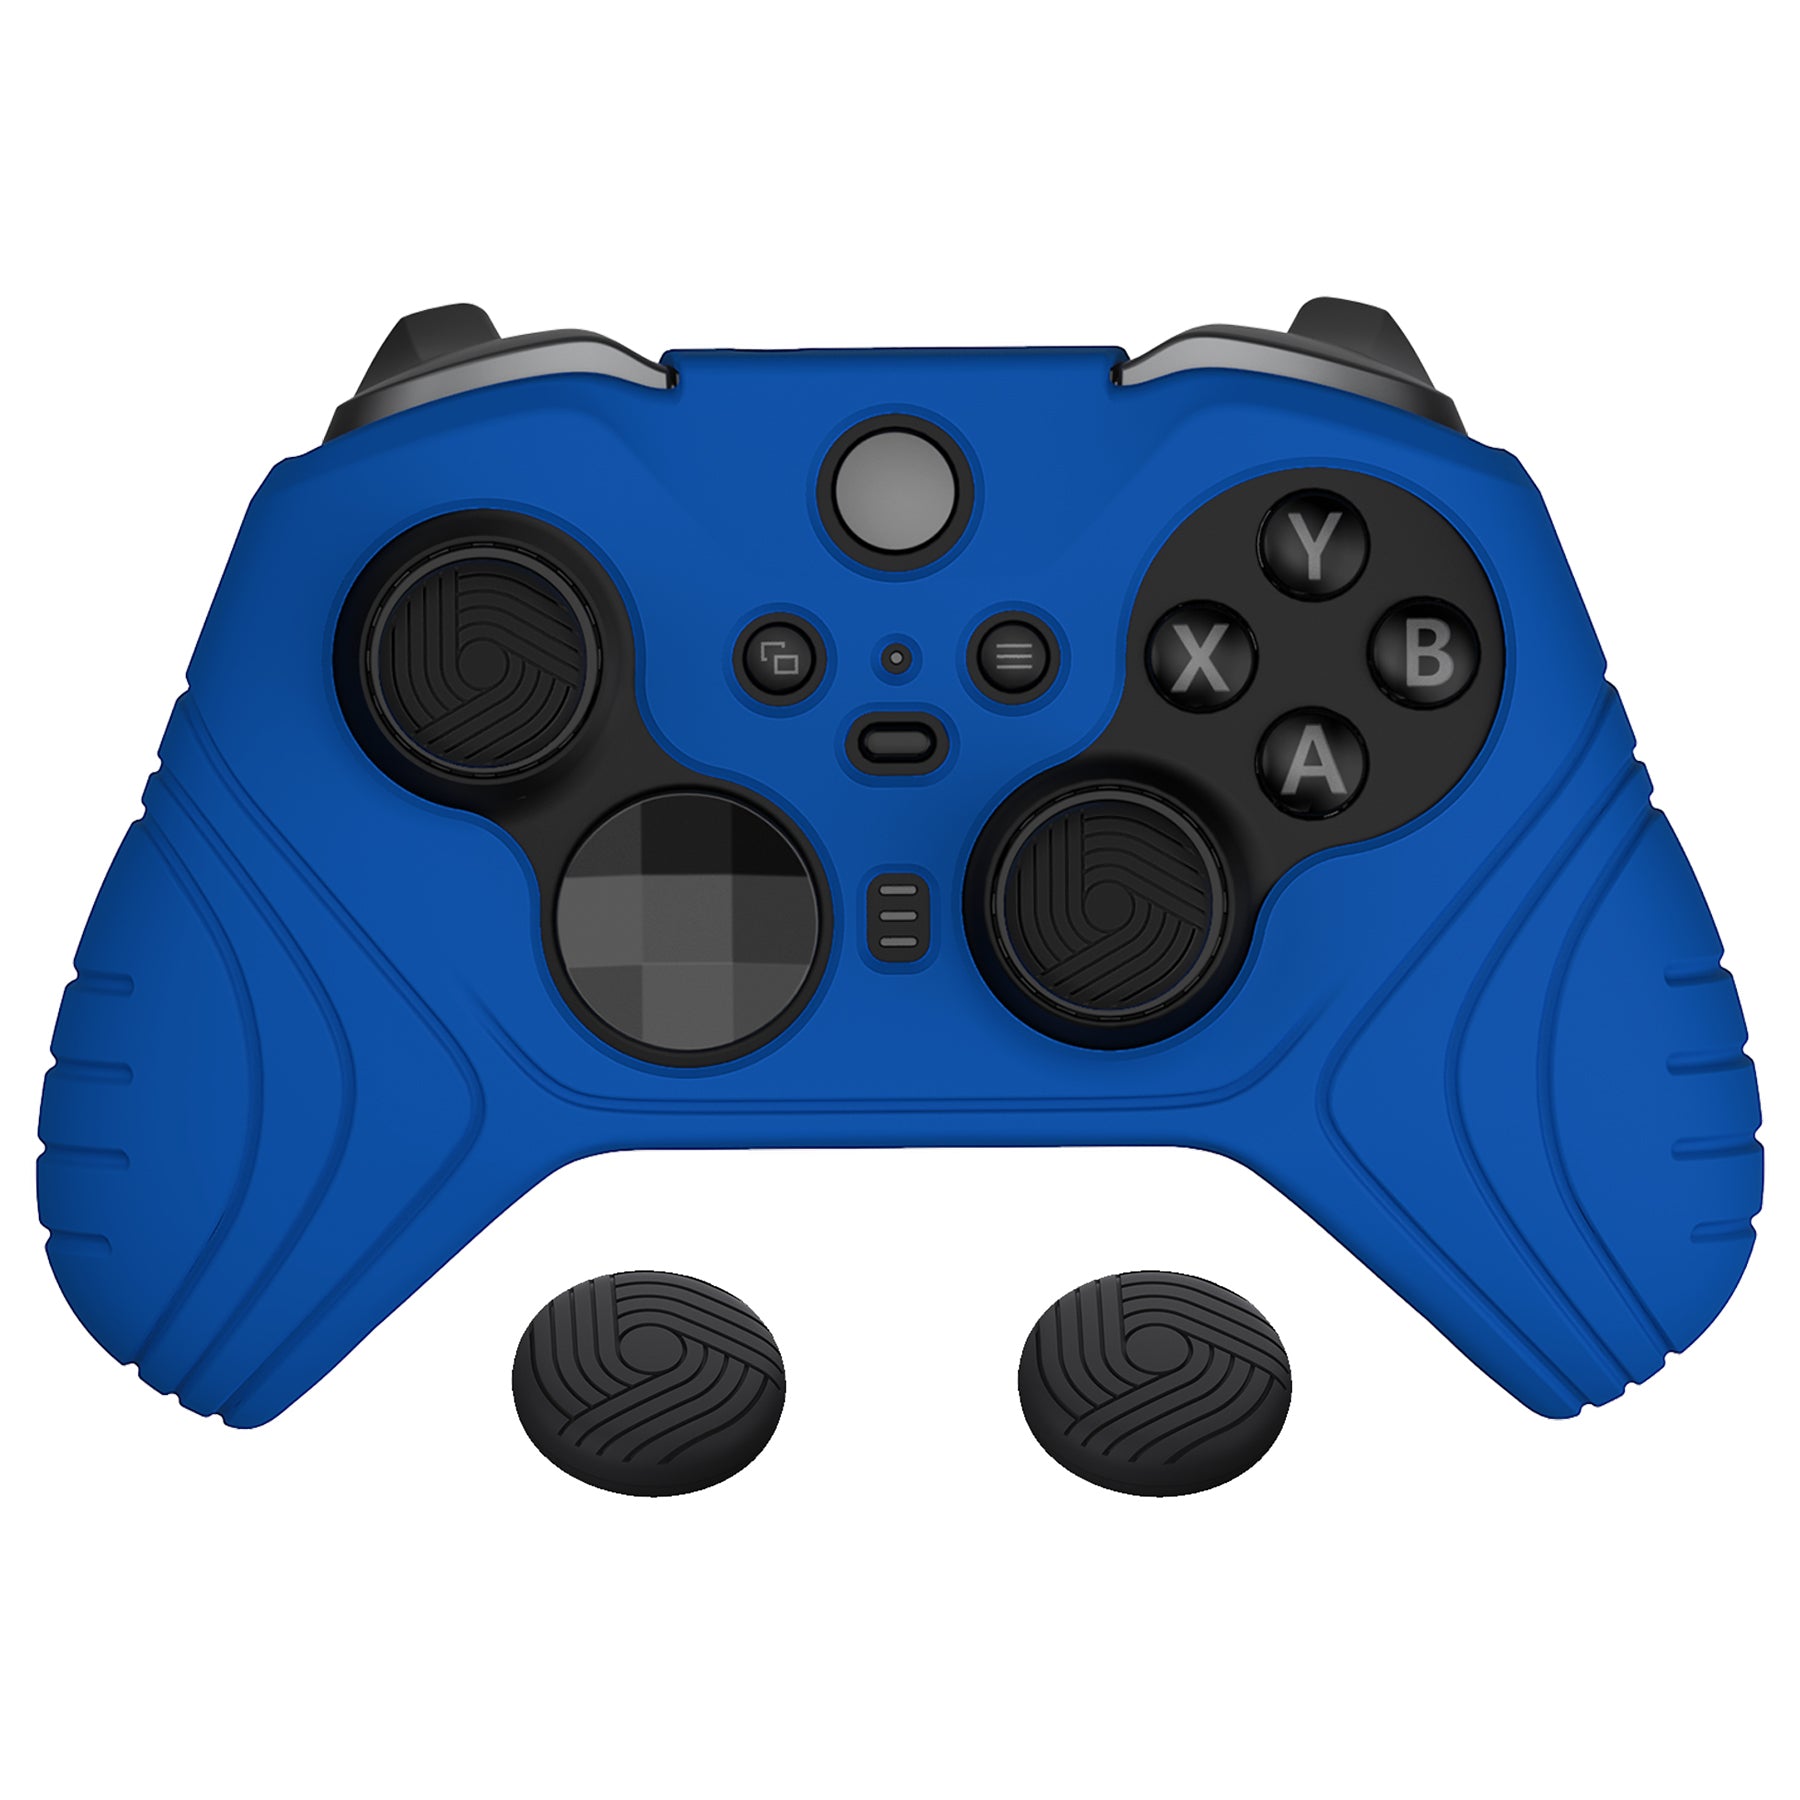 PlayVital Samurai Edition Anti Slip Silicone Case Cover for Xbox Elite Wireless Controller Series 2, Ergonomic Soft Rubber Skin Protector for Xbox Elite Series 2 with Thumb Grip Caps - Blue - XBE2M008 playvital